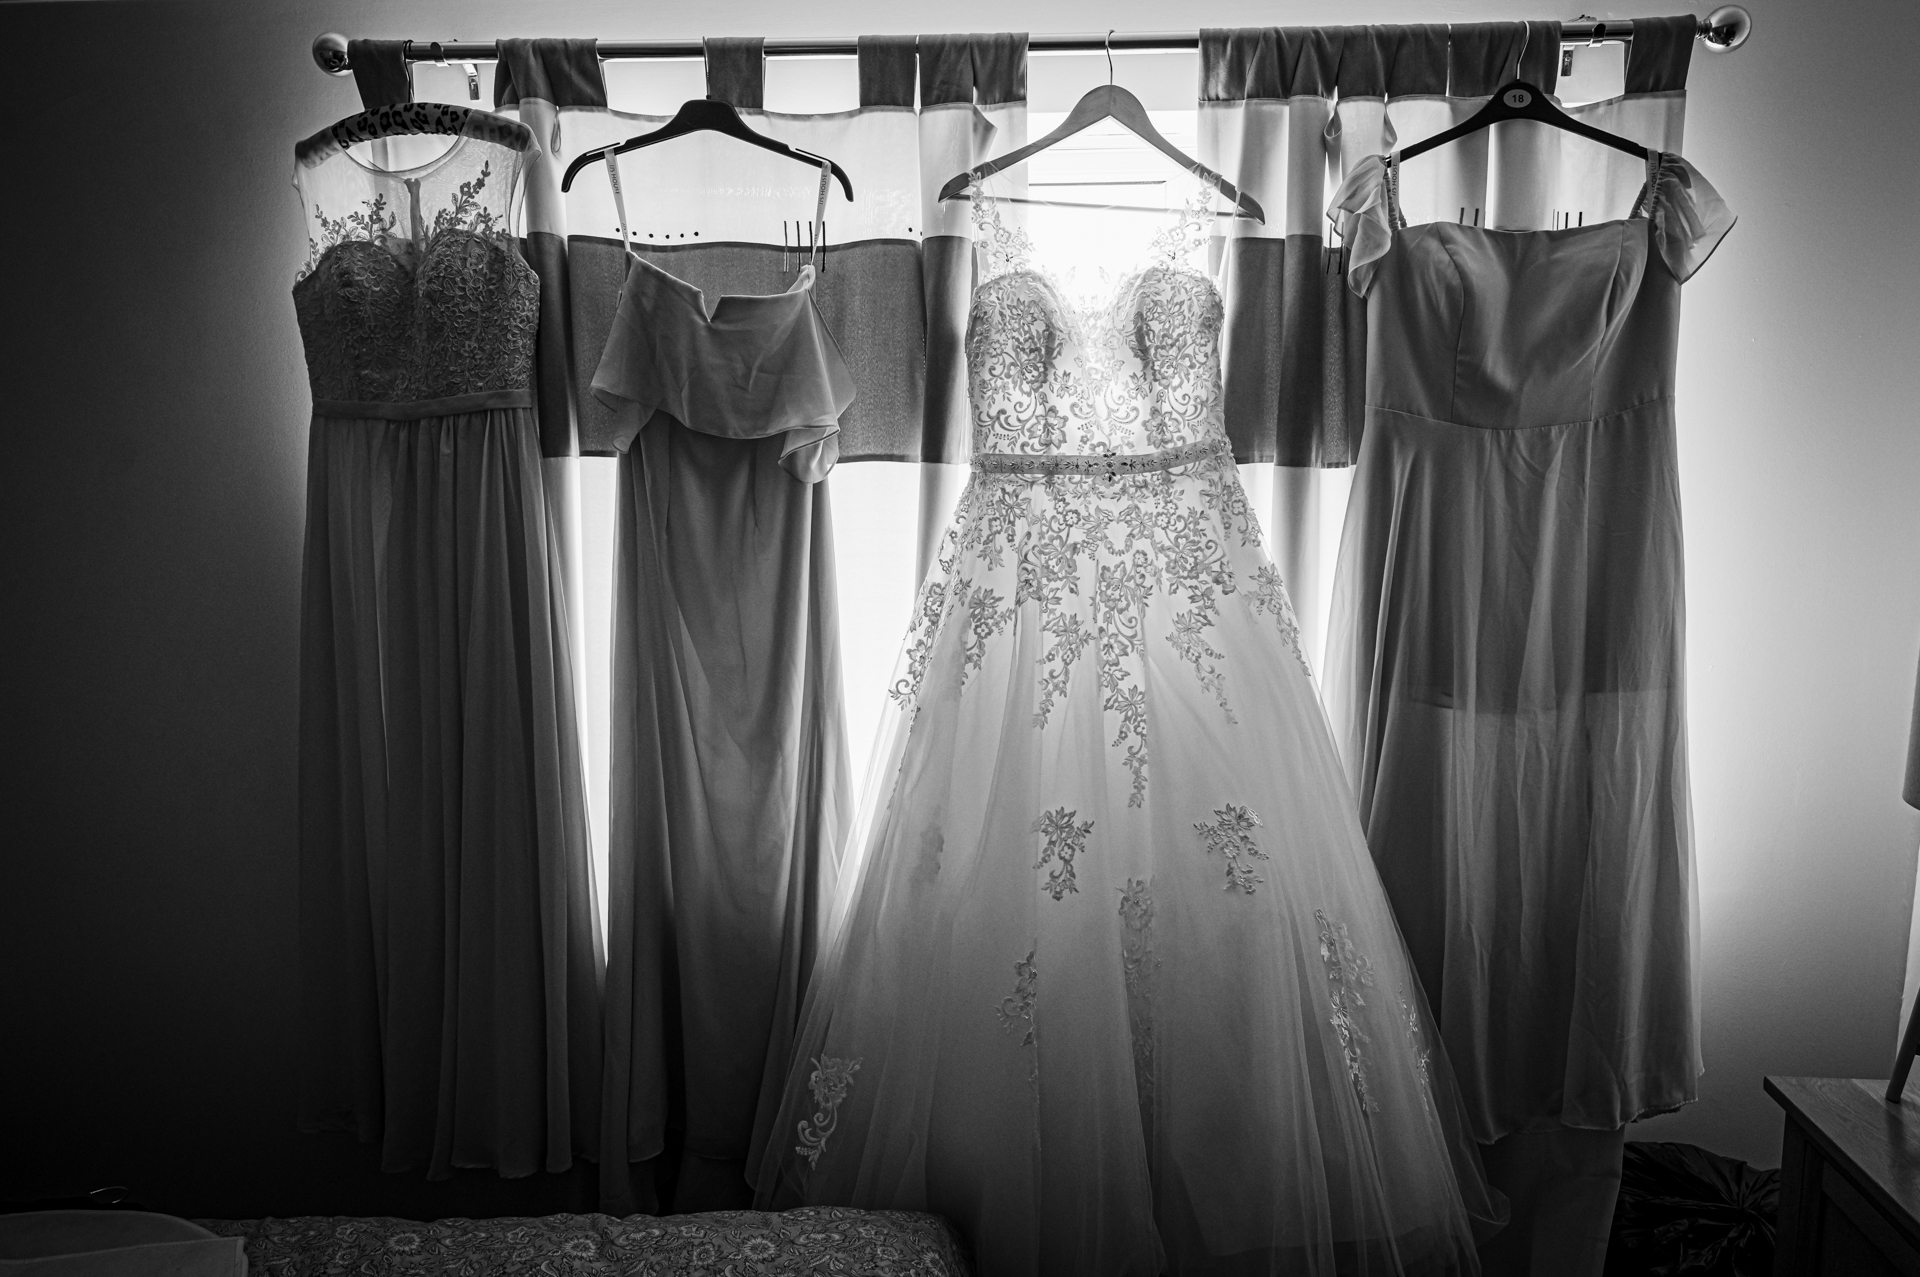 wedding dresses all hanging up in a row